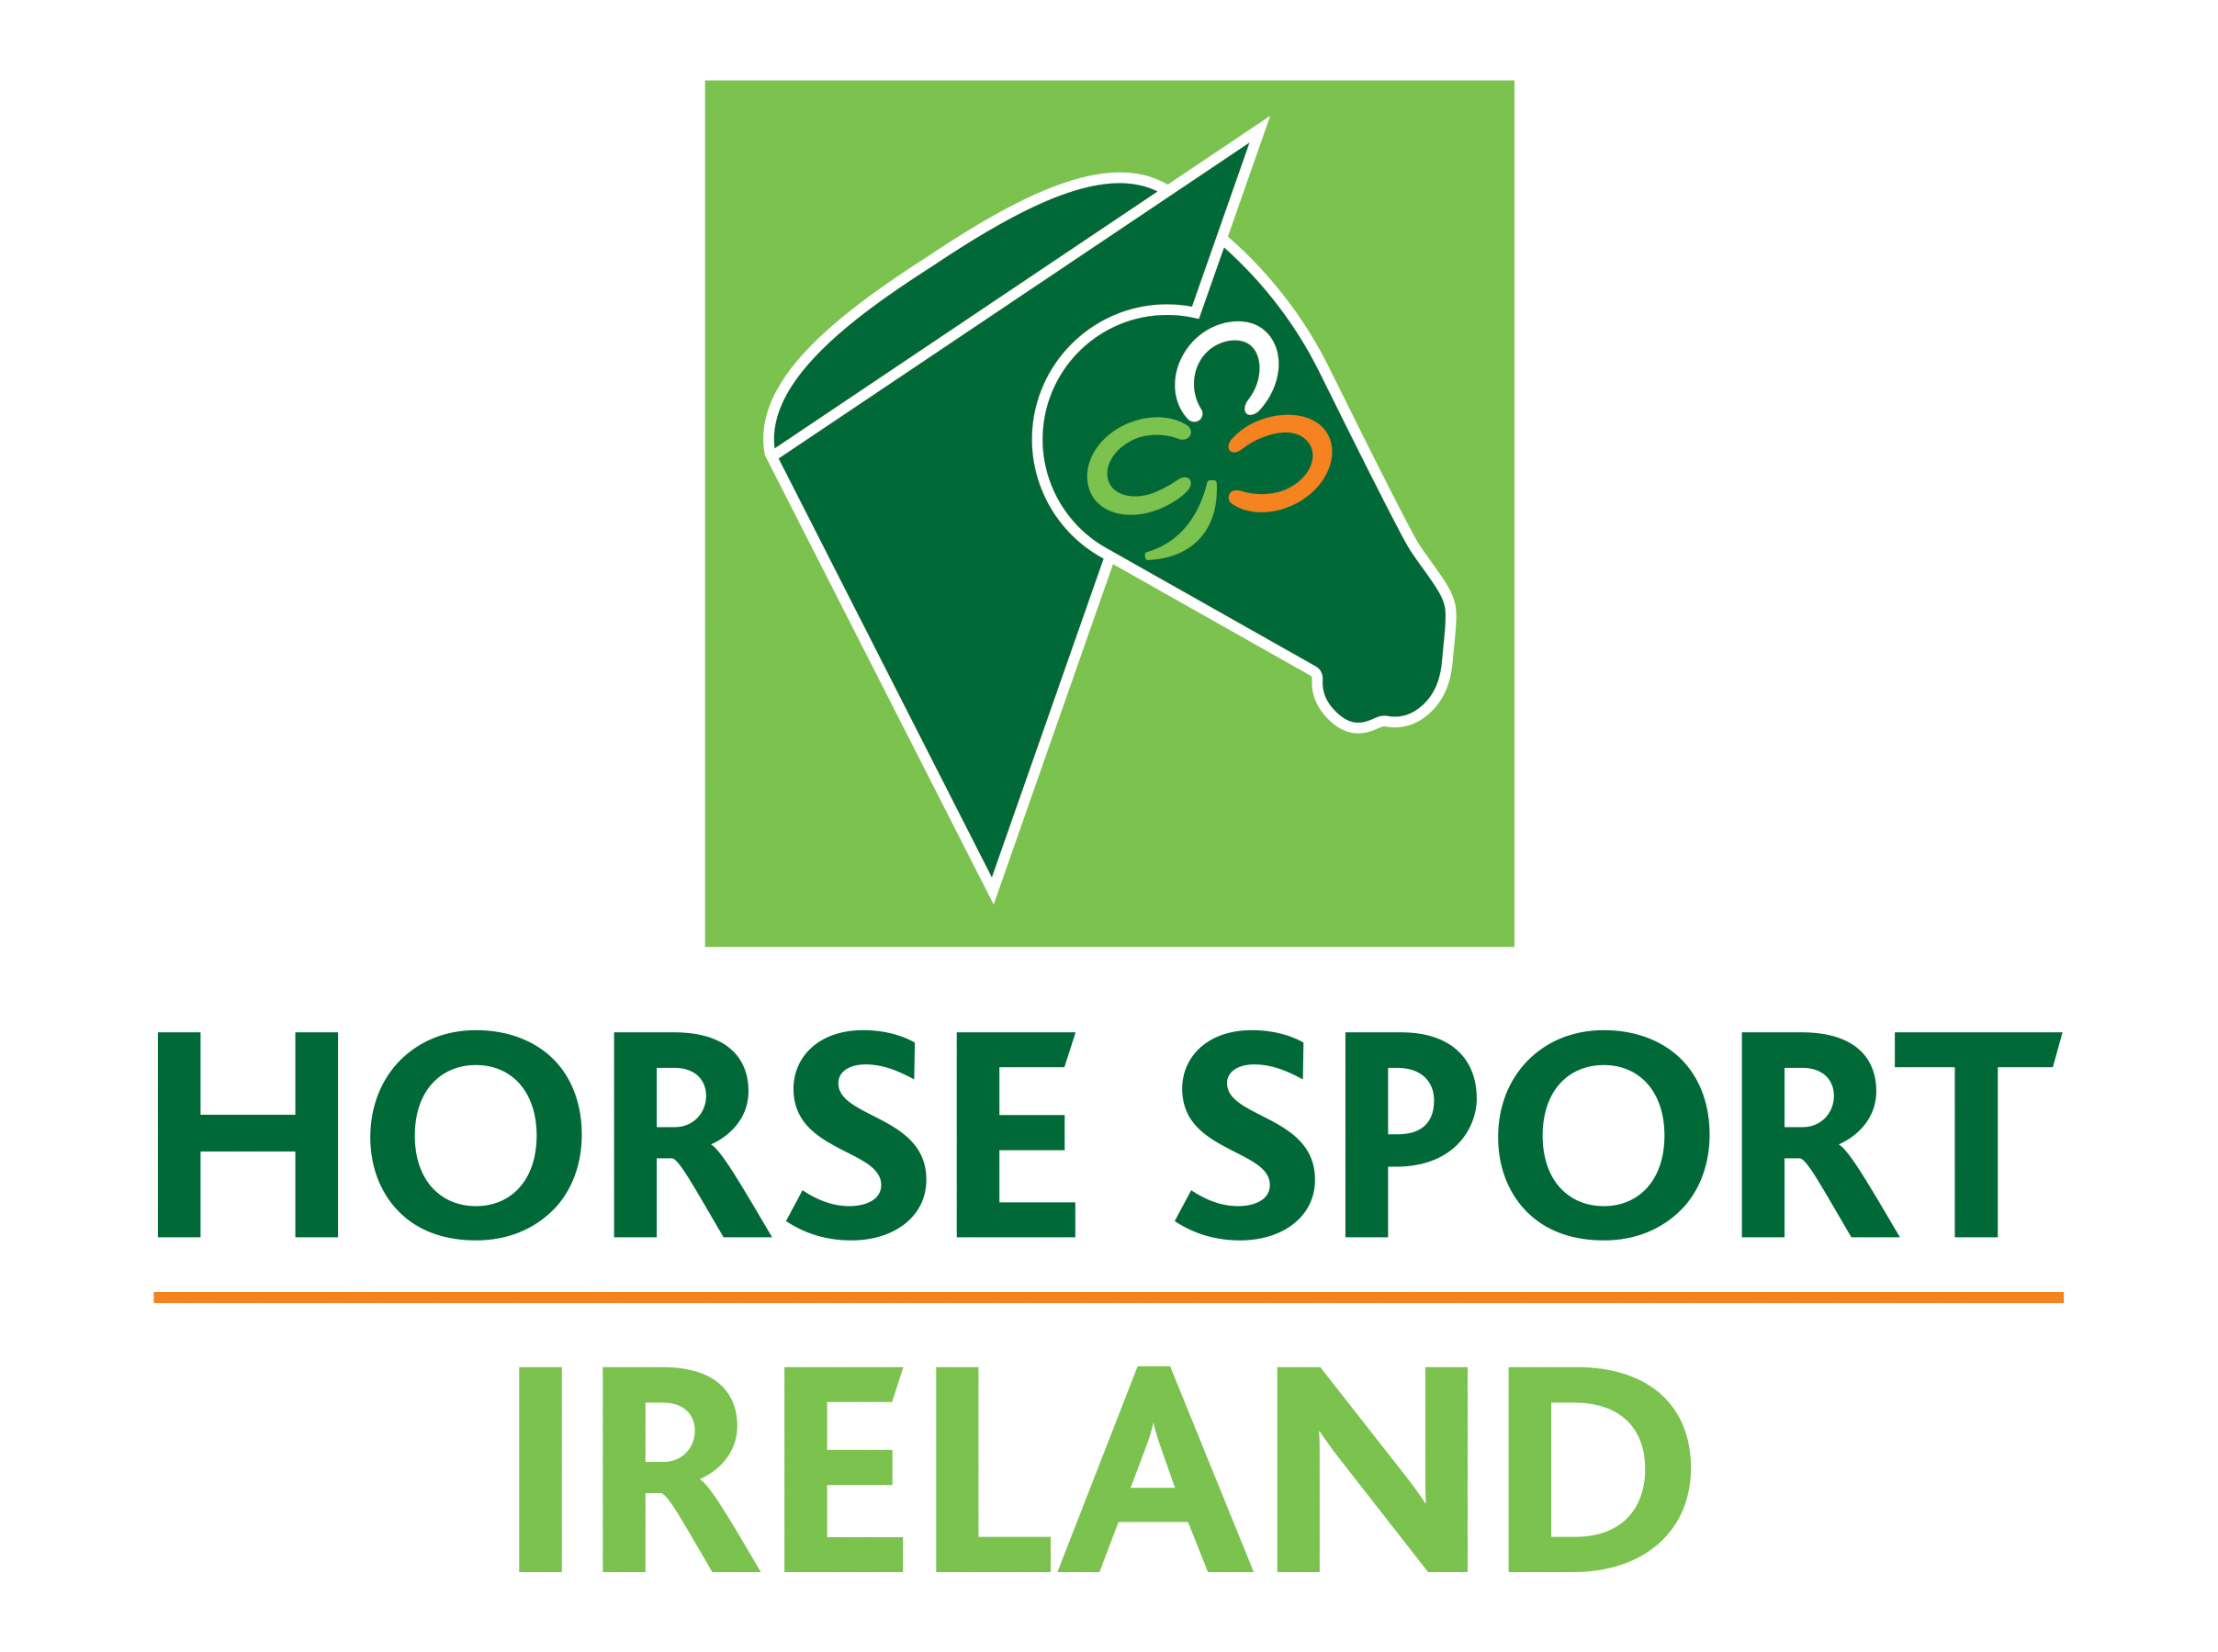 HSI Stallion Selection Applications open for 2022